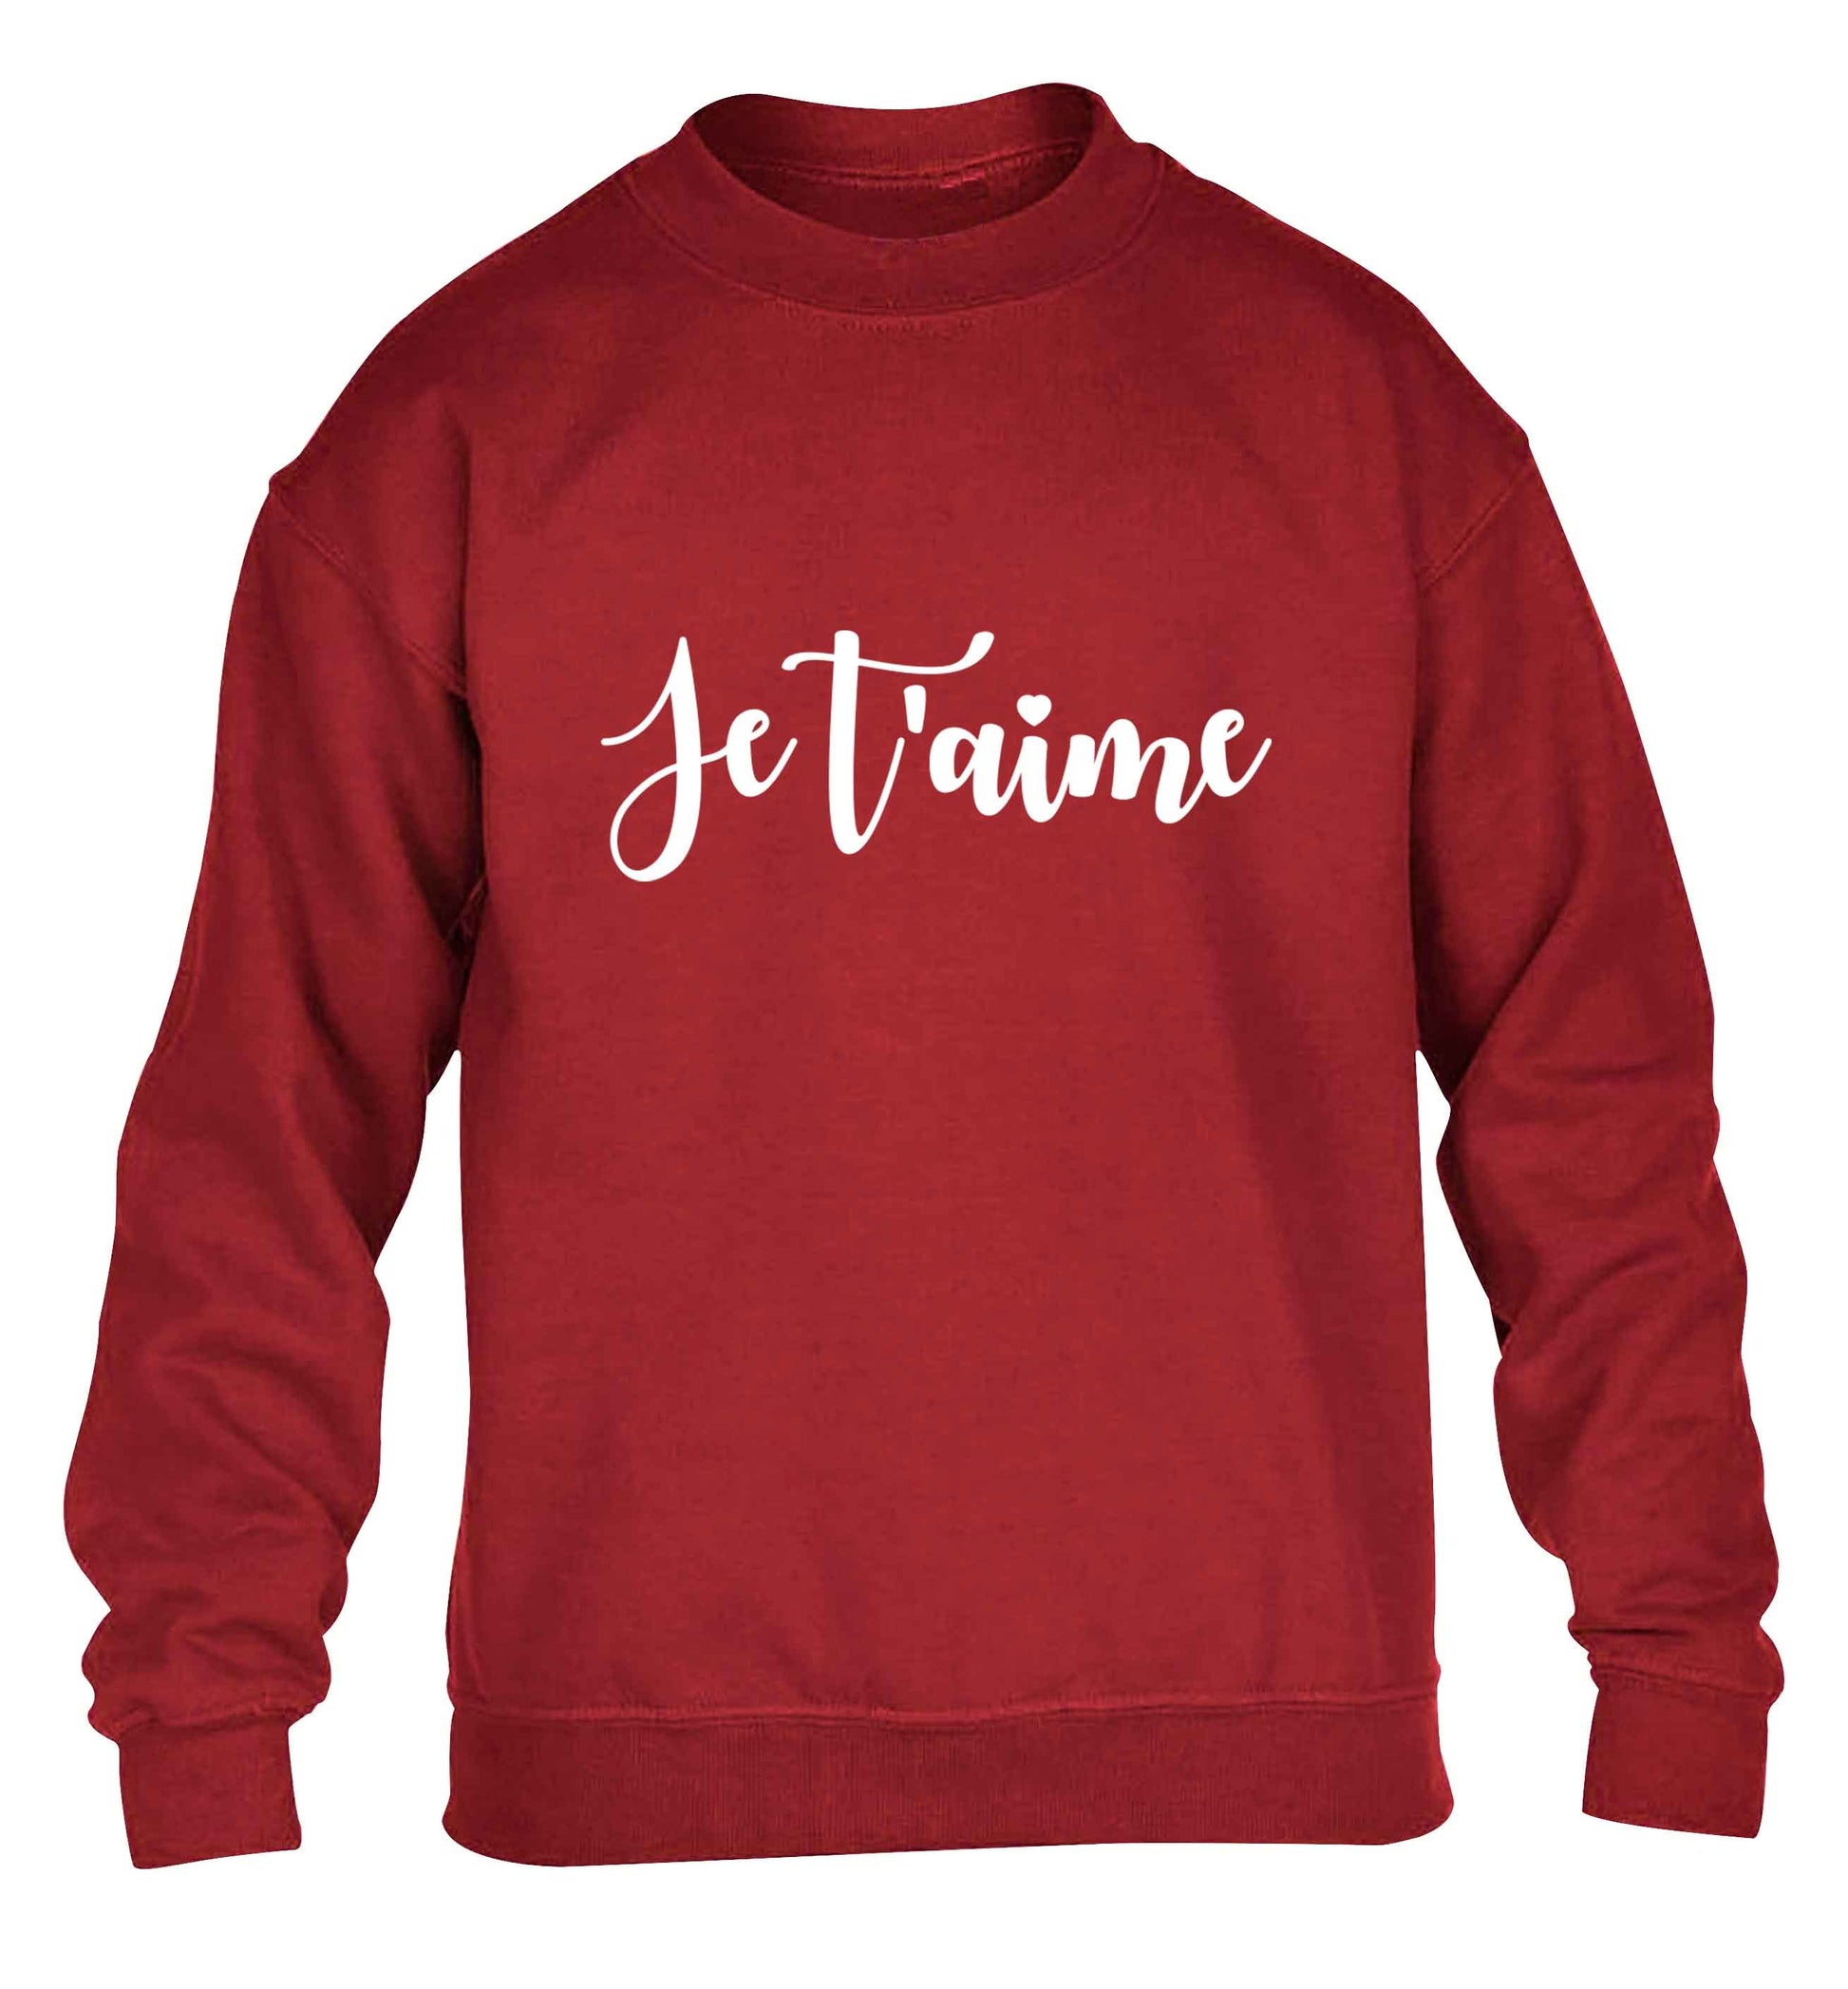 Je t'aime children's grey sweater 12-13 Years